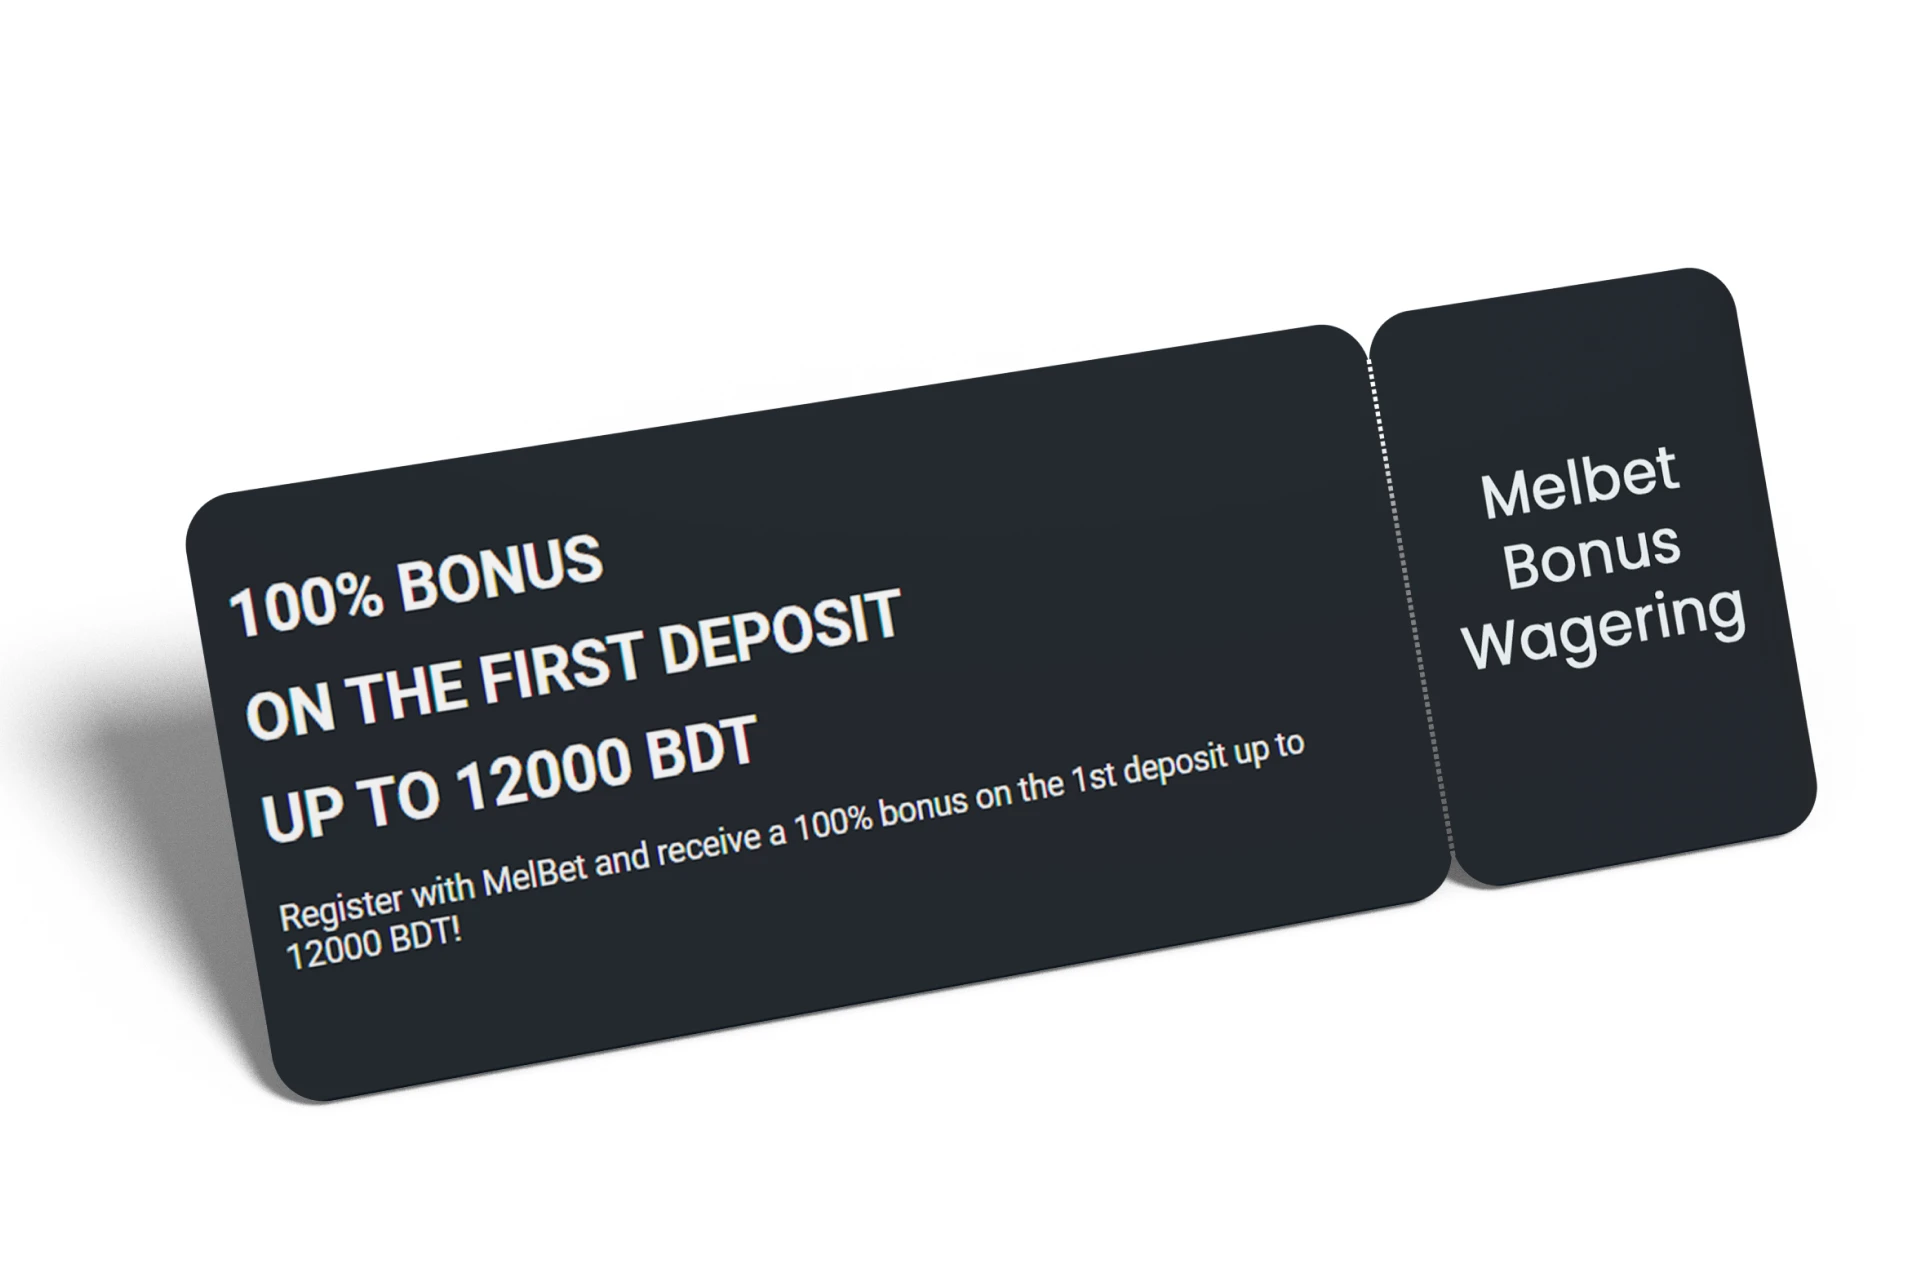 Here are some wagering requirements to take advantage of the Melbet welcome bonus.